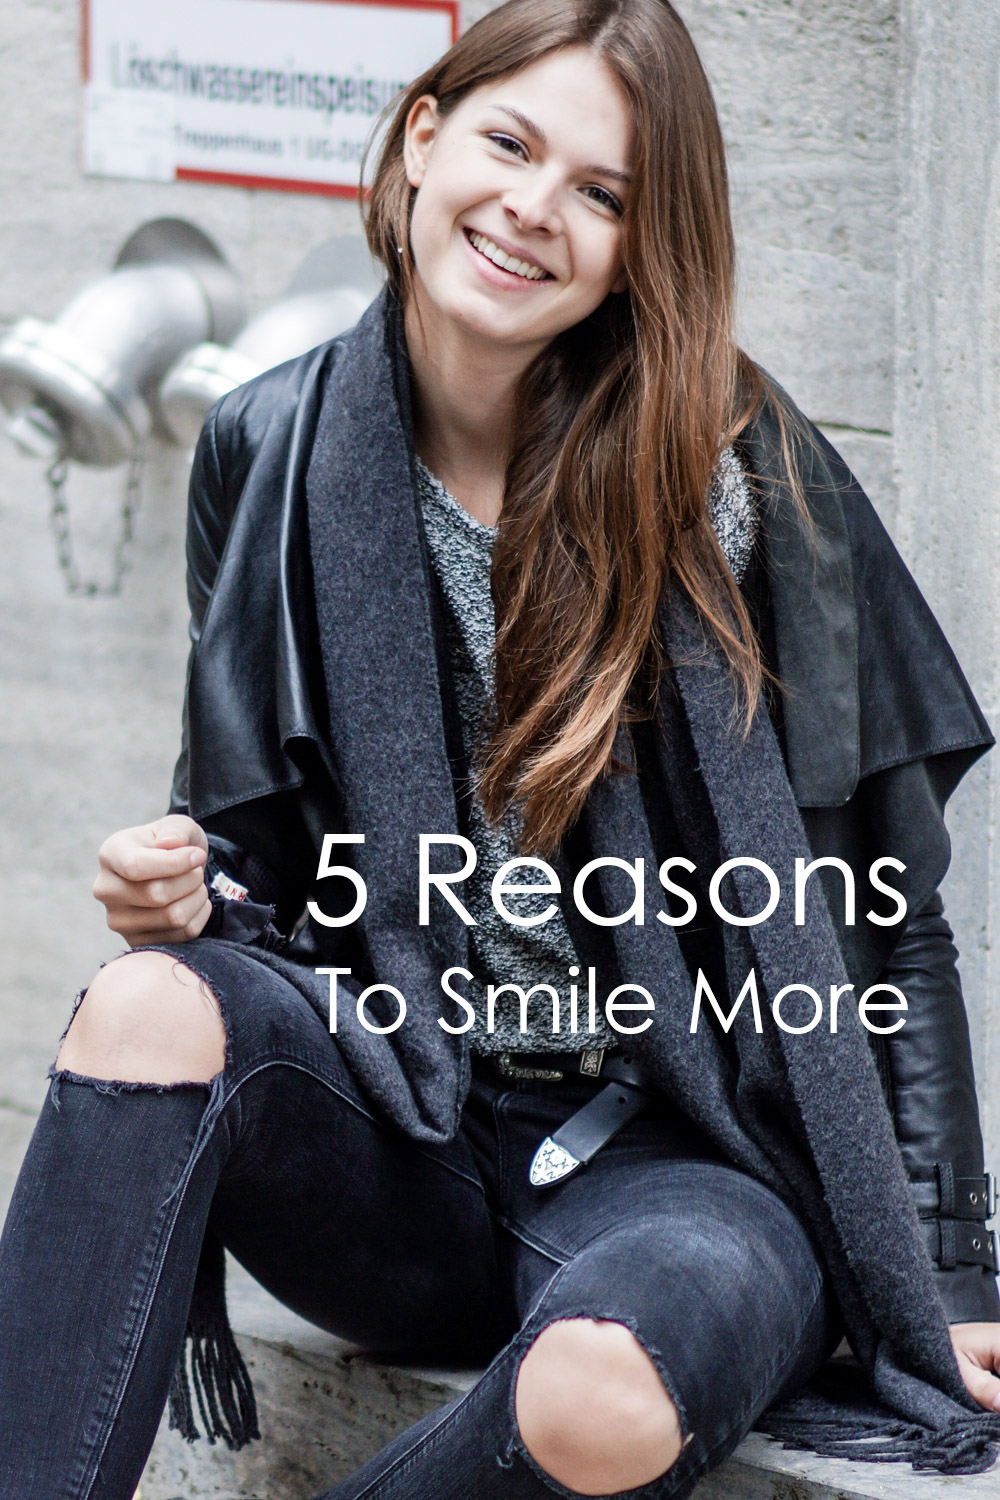 5 Reasons To Smile More